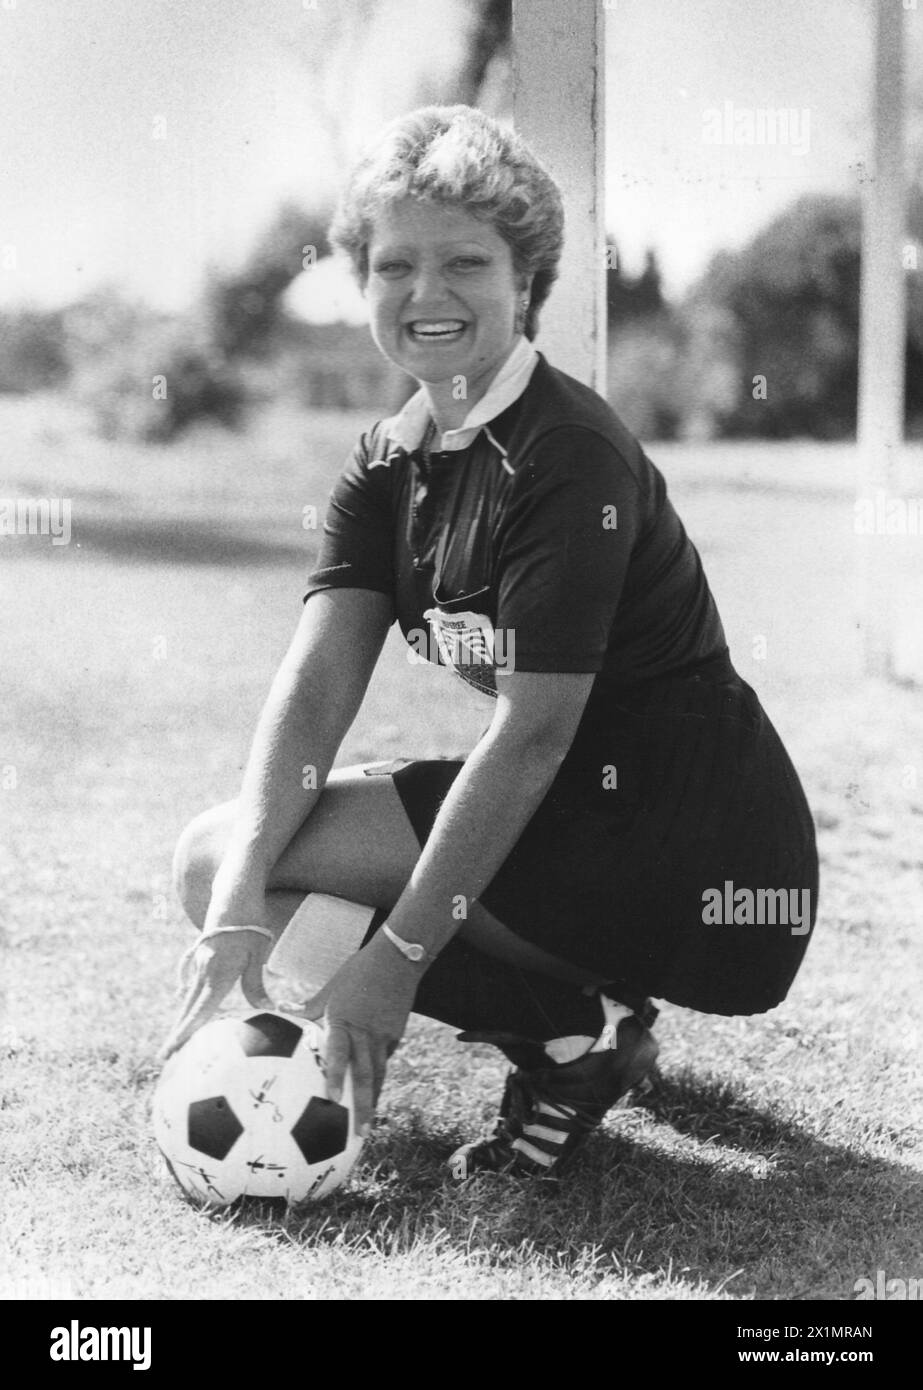 F.A. CUP REFEREE KIM GEORGE FROM BOGNOR, 1988 PIC MIKE WALKER 1988 Stock Photo